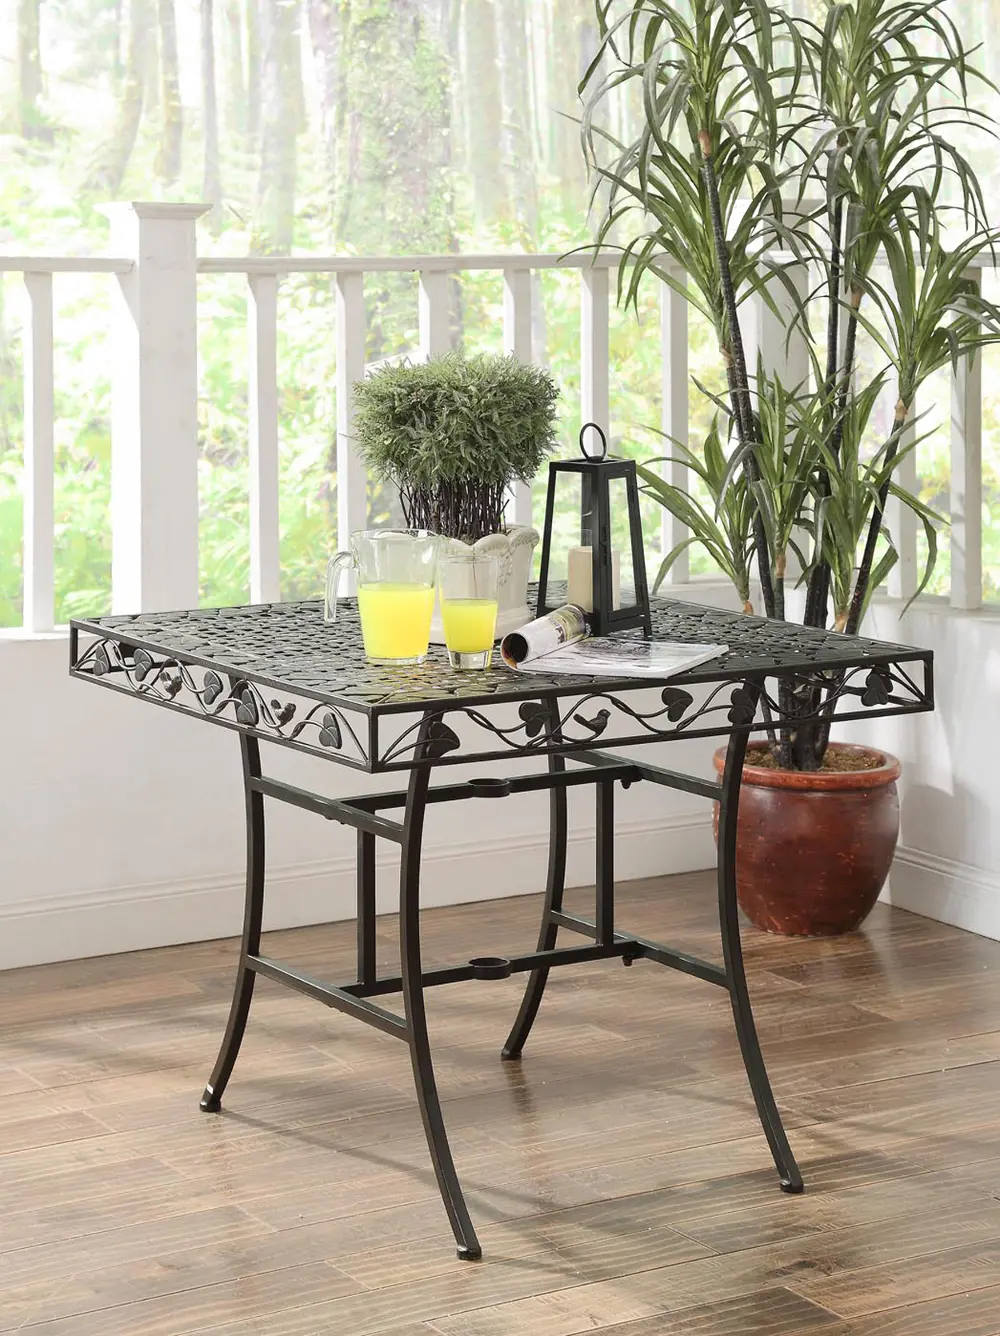 Metal Square Outdoor Patio Table - Ivy League -1